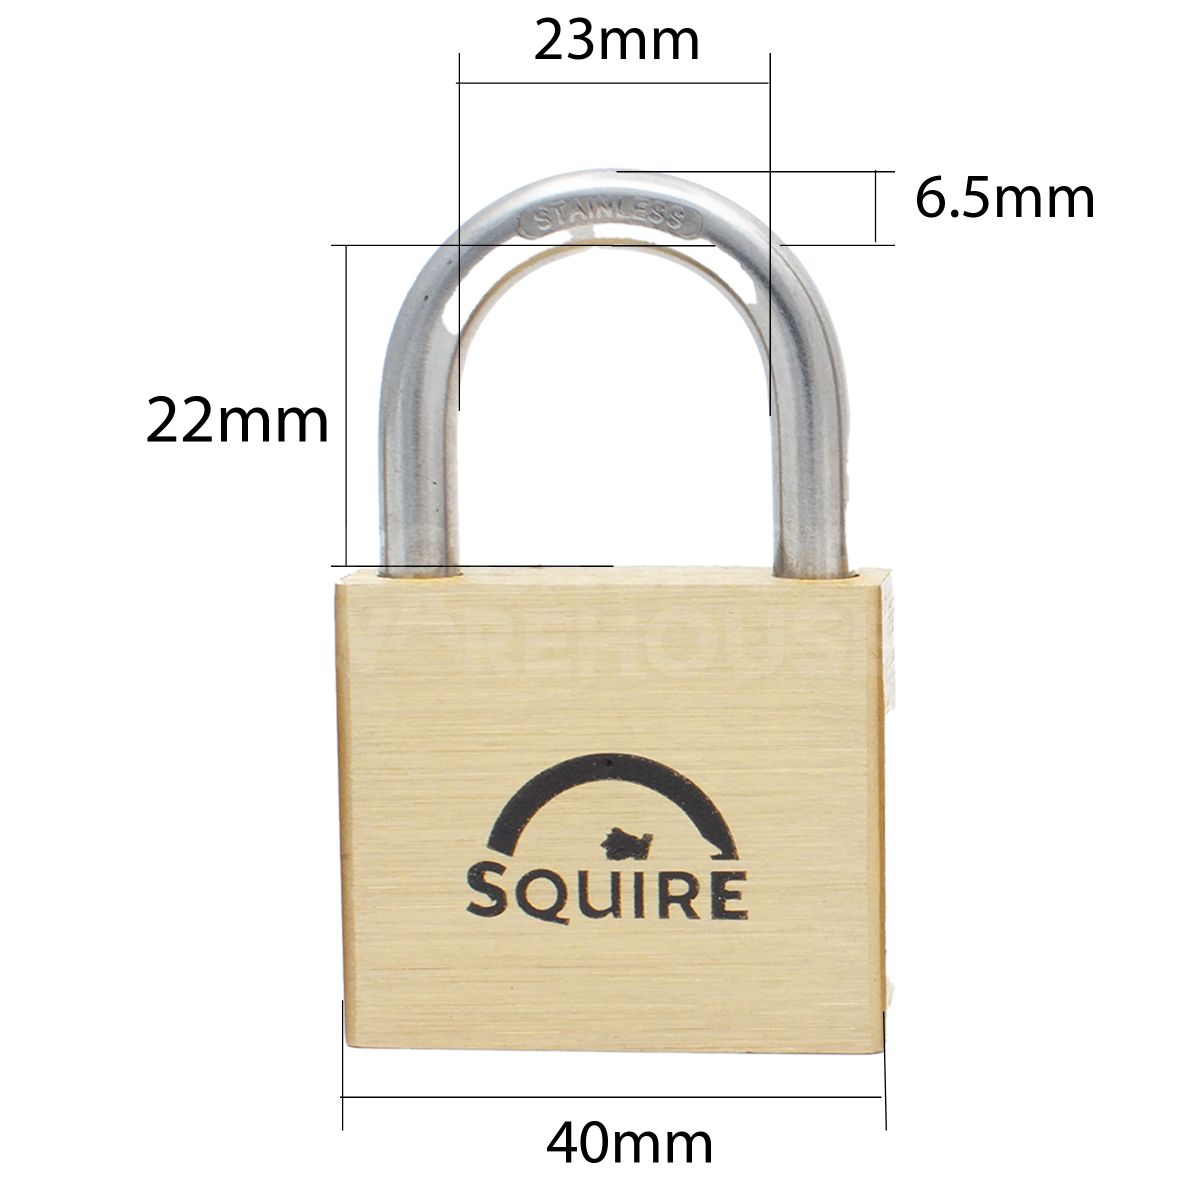 Dimensions Image: Squire LN4S MARINE - 40mm - Brass Padlock Stainless Steel Shackle